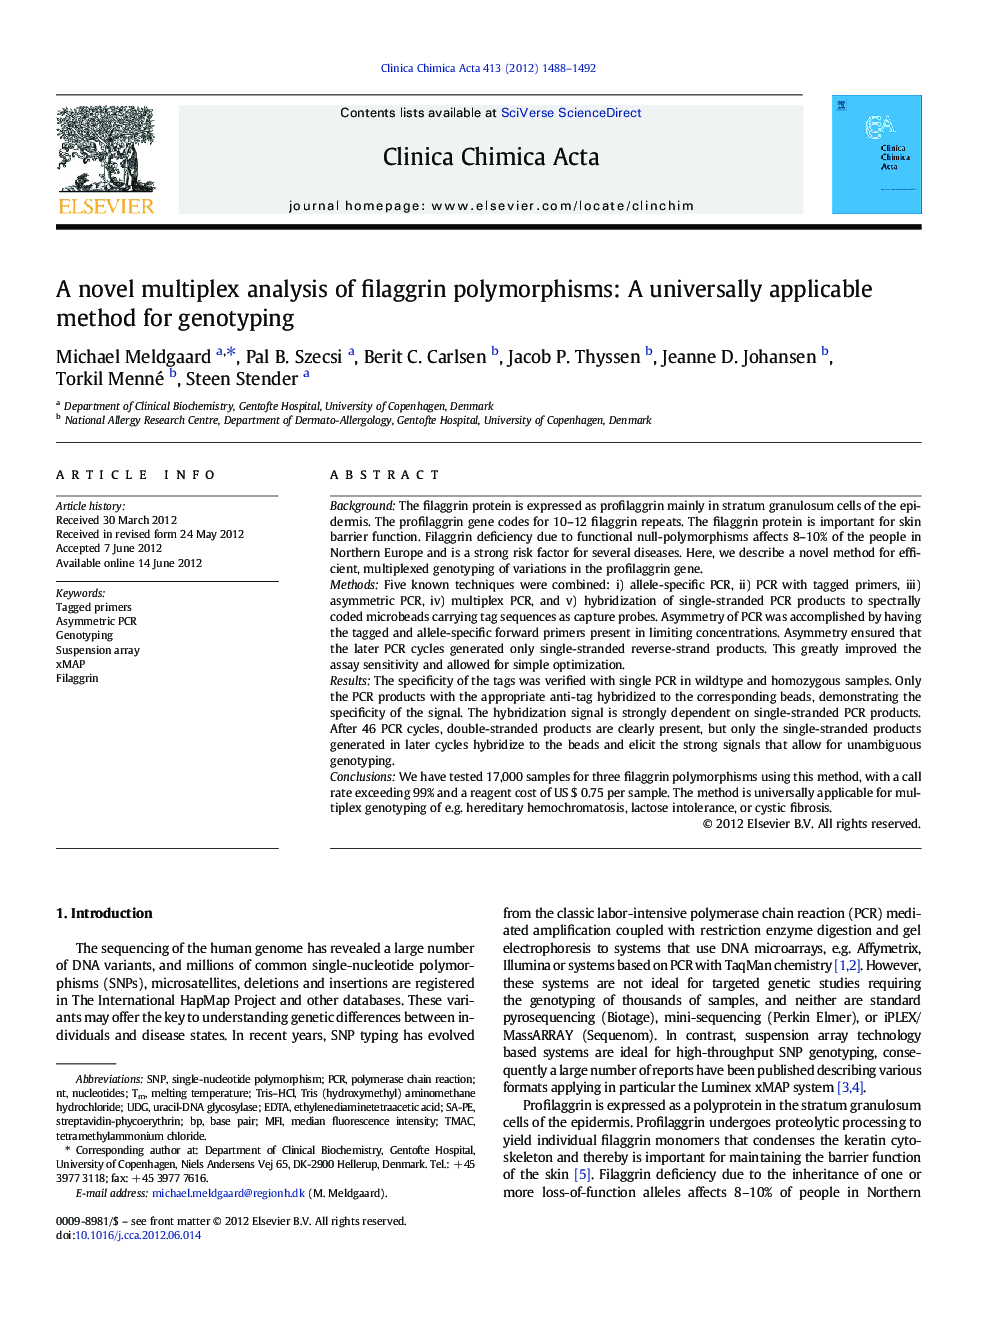 A novel multiplex analysis of filaggrin polymorphisms: A universally applicable method for genotyping